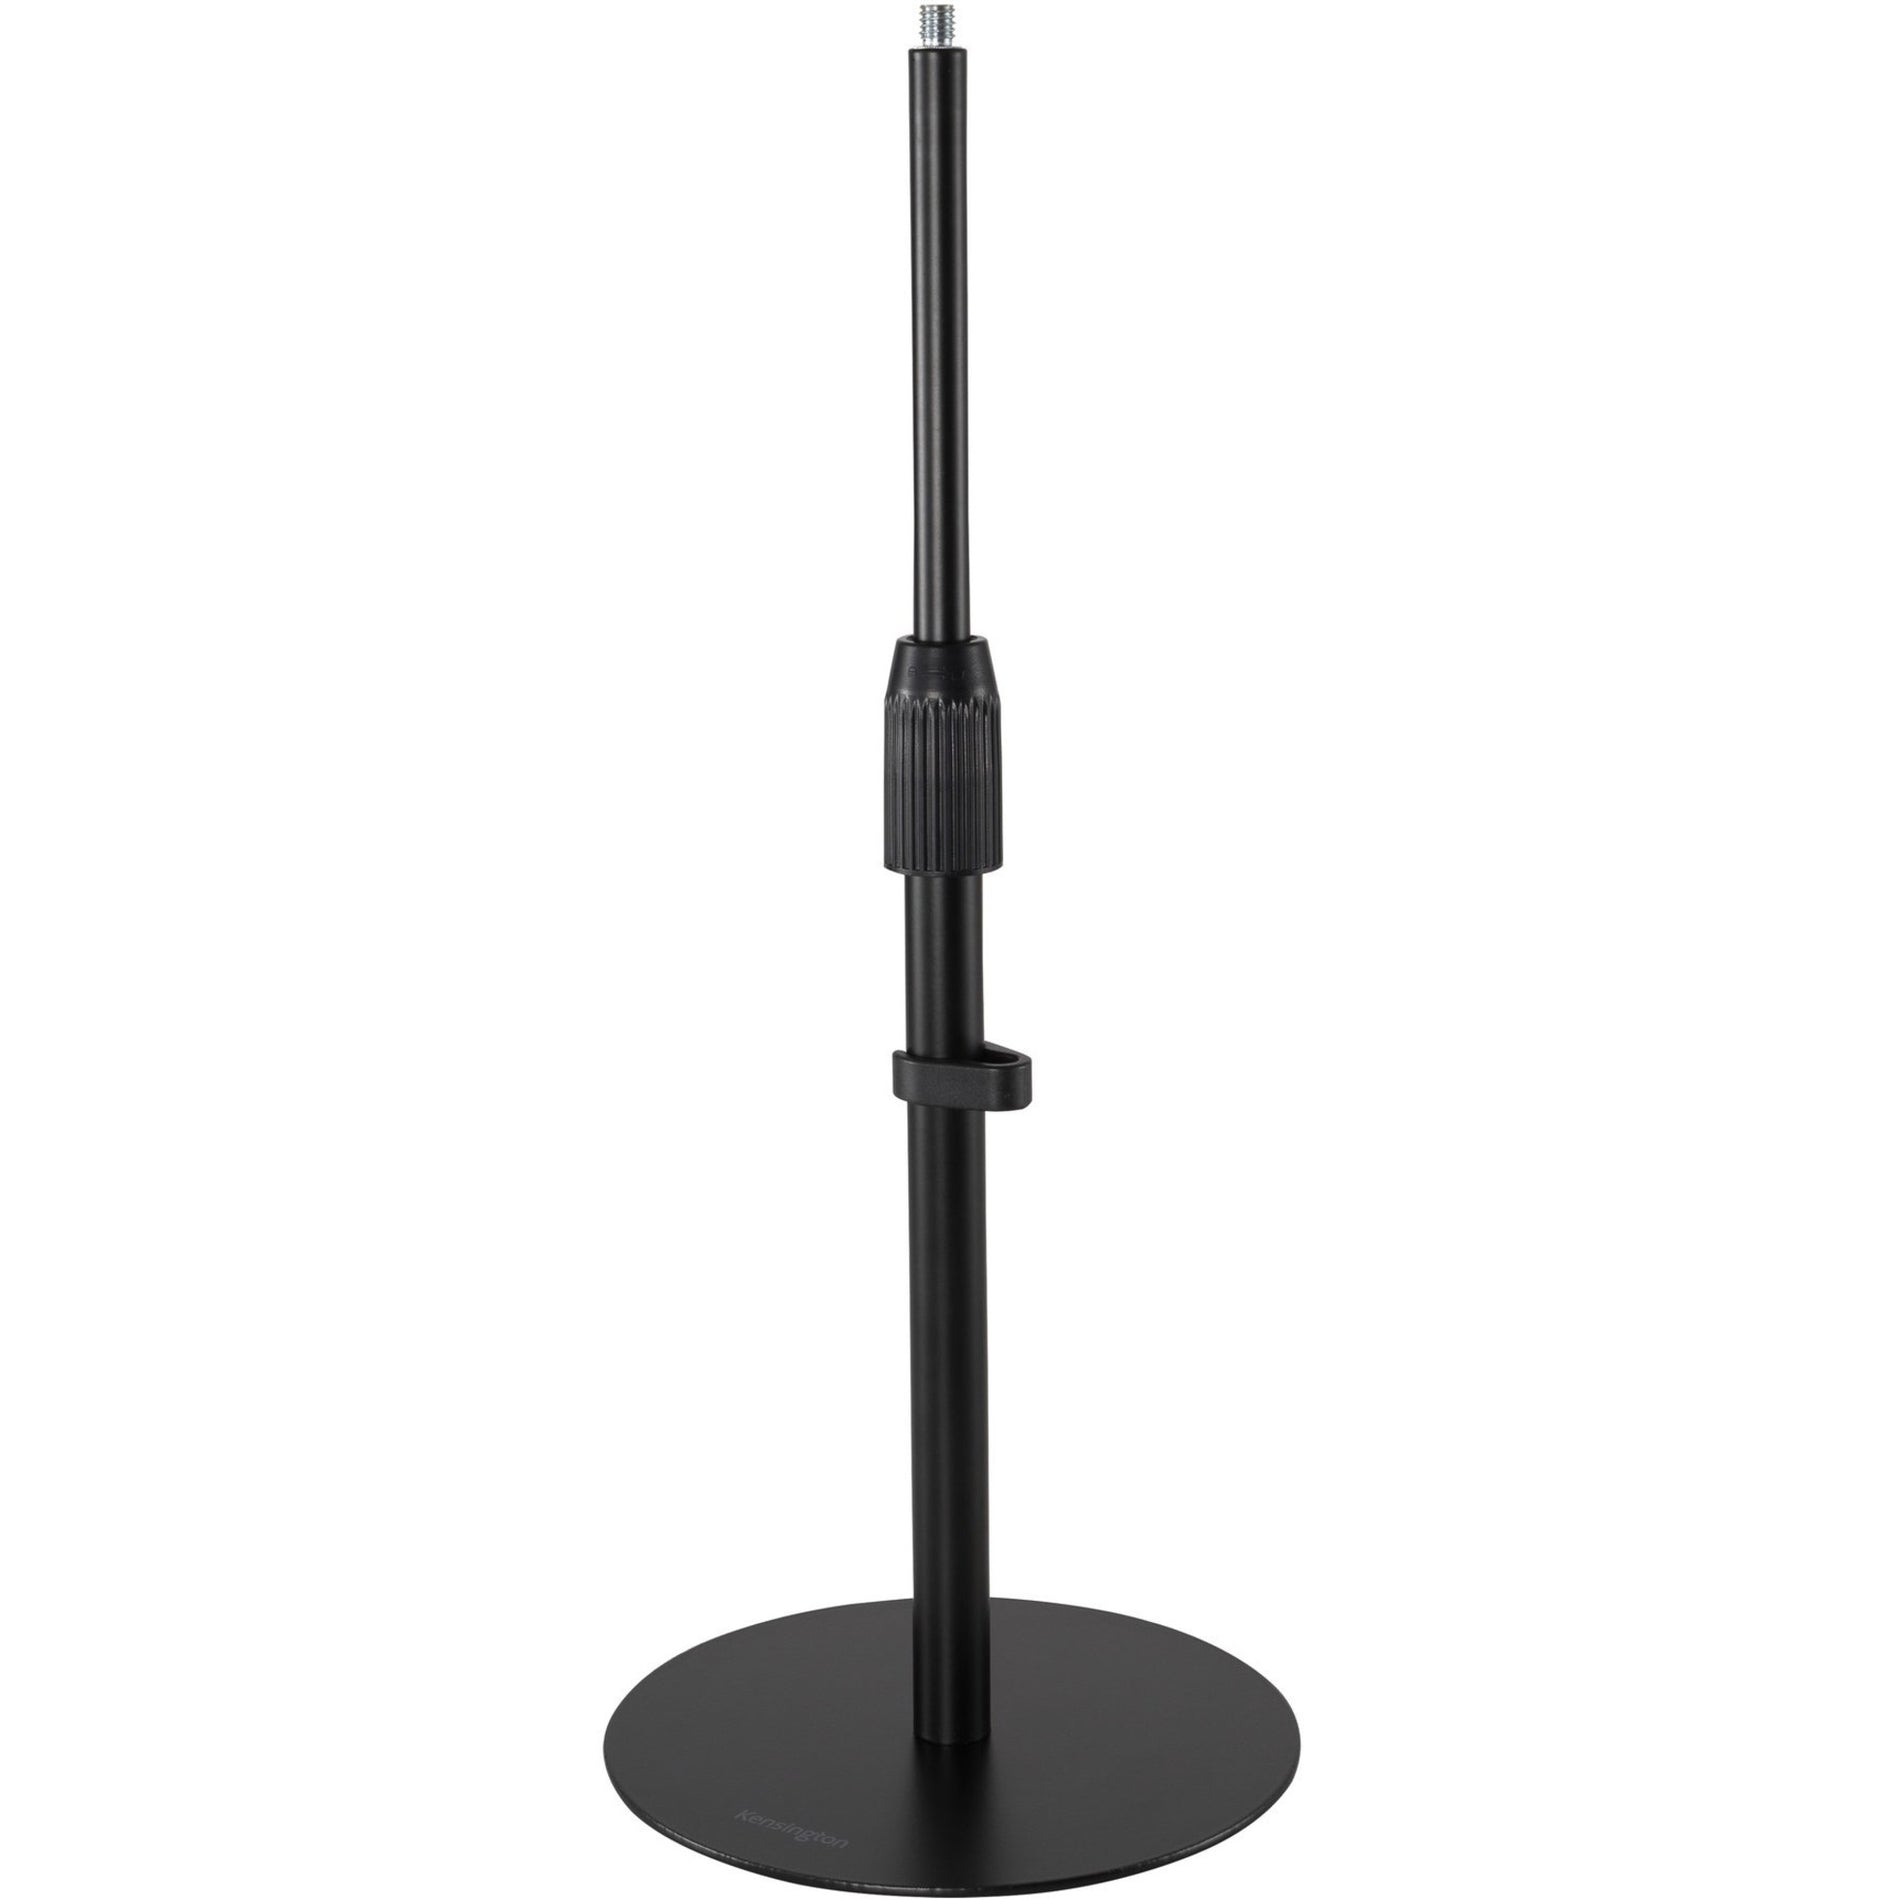 Kensington K87651WW A1010 Telescoping Desk Stand, Cable Management, Non-skid, Height Adjustable